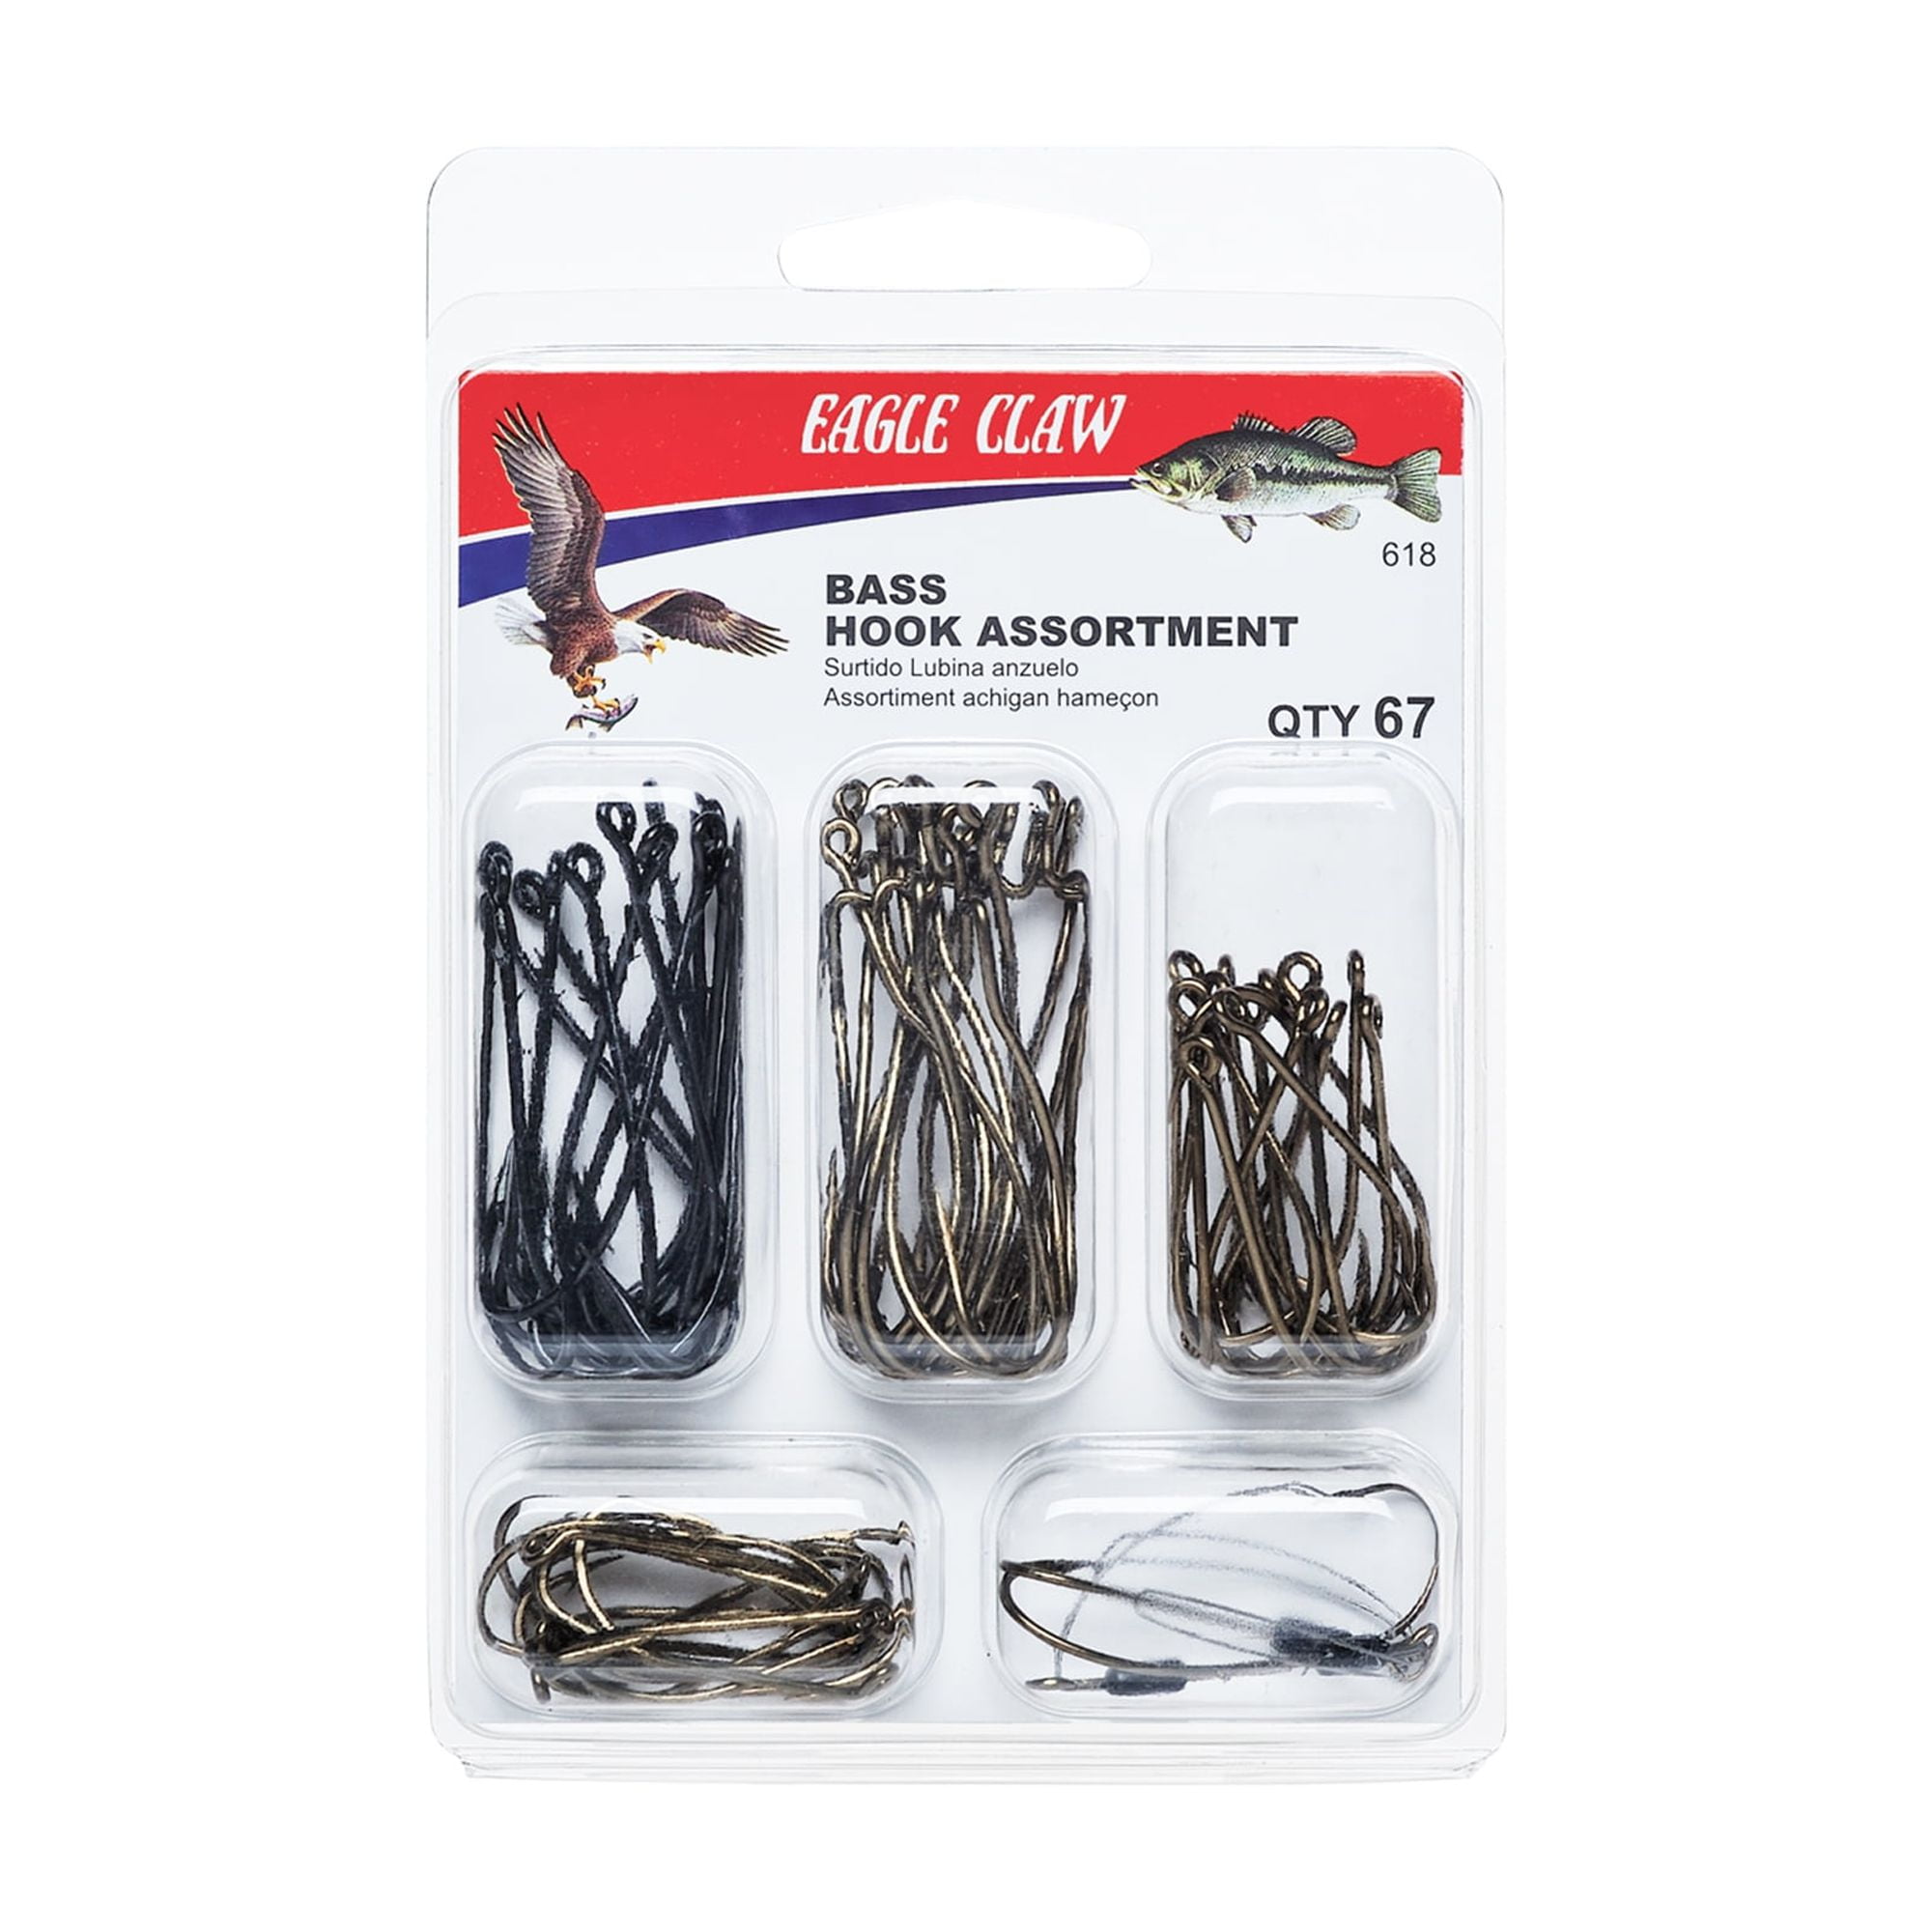  EAGLE CLAW BASS Hook Assortment, Fishing Hooks for